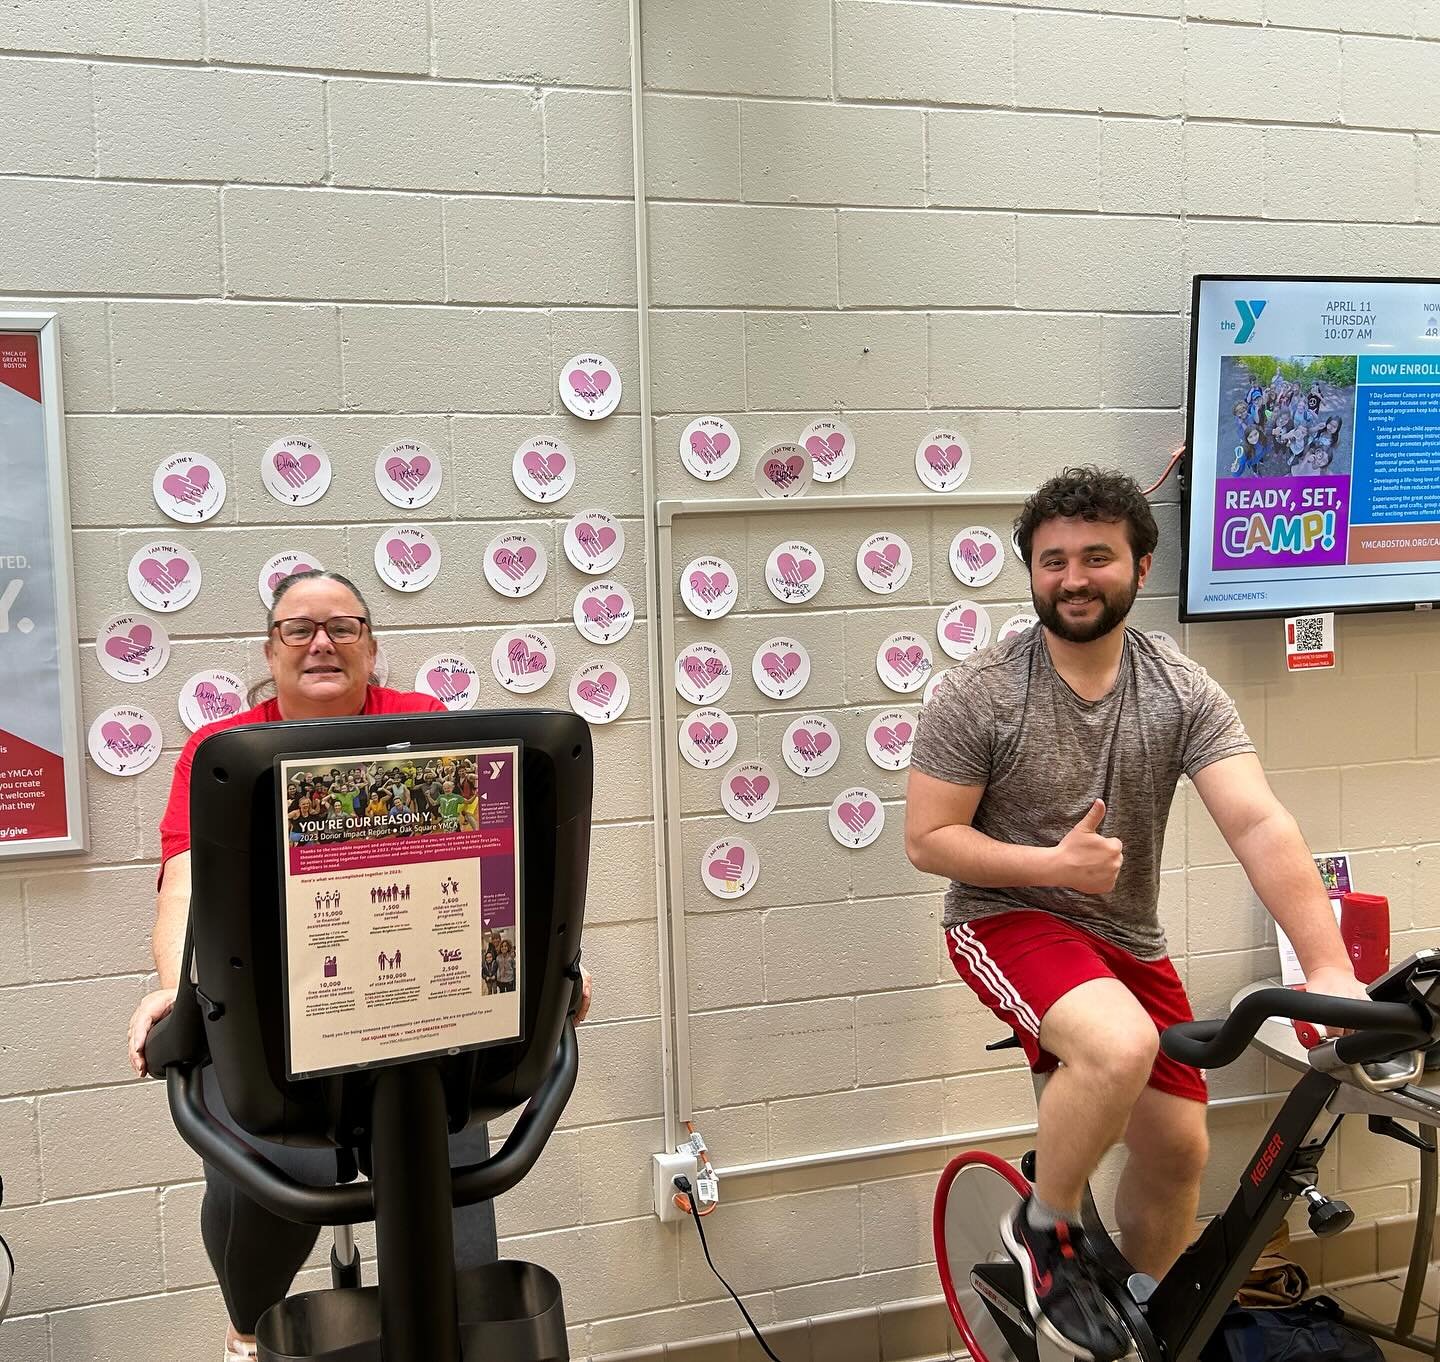 Before and after our hour in cycle jail. AVMS and @brightonmainstreets teamed up to raise money for the @ymca_oaksquare after school programming! Head to their page to donate!